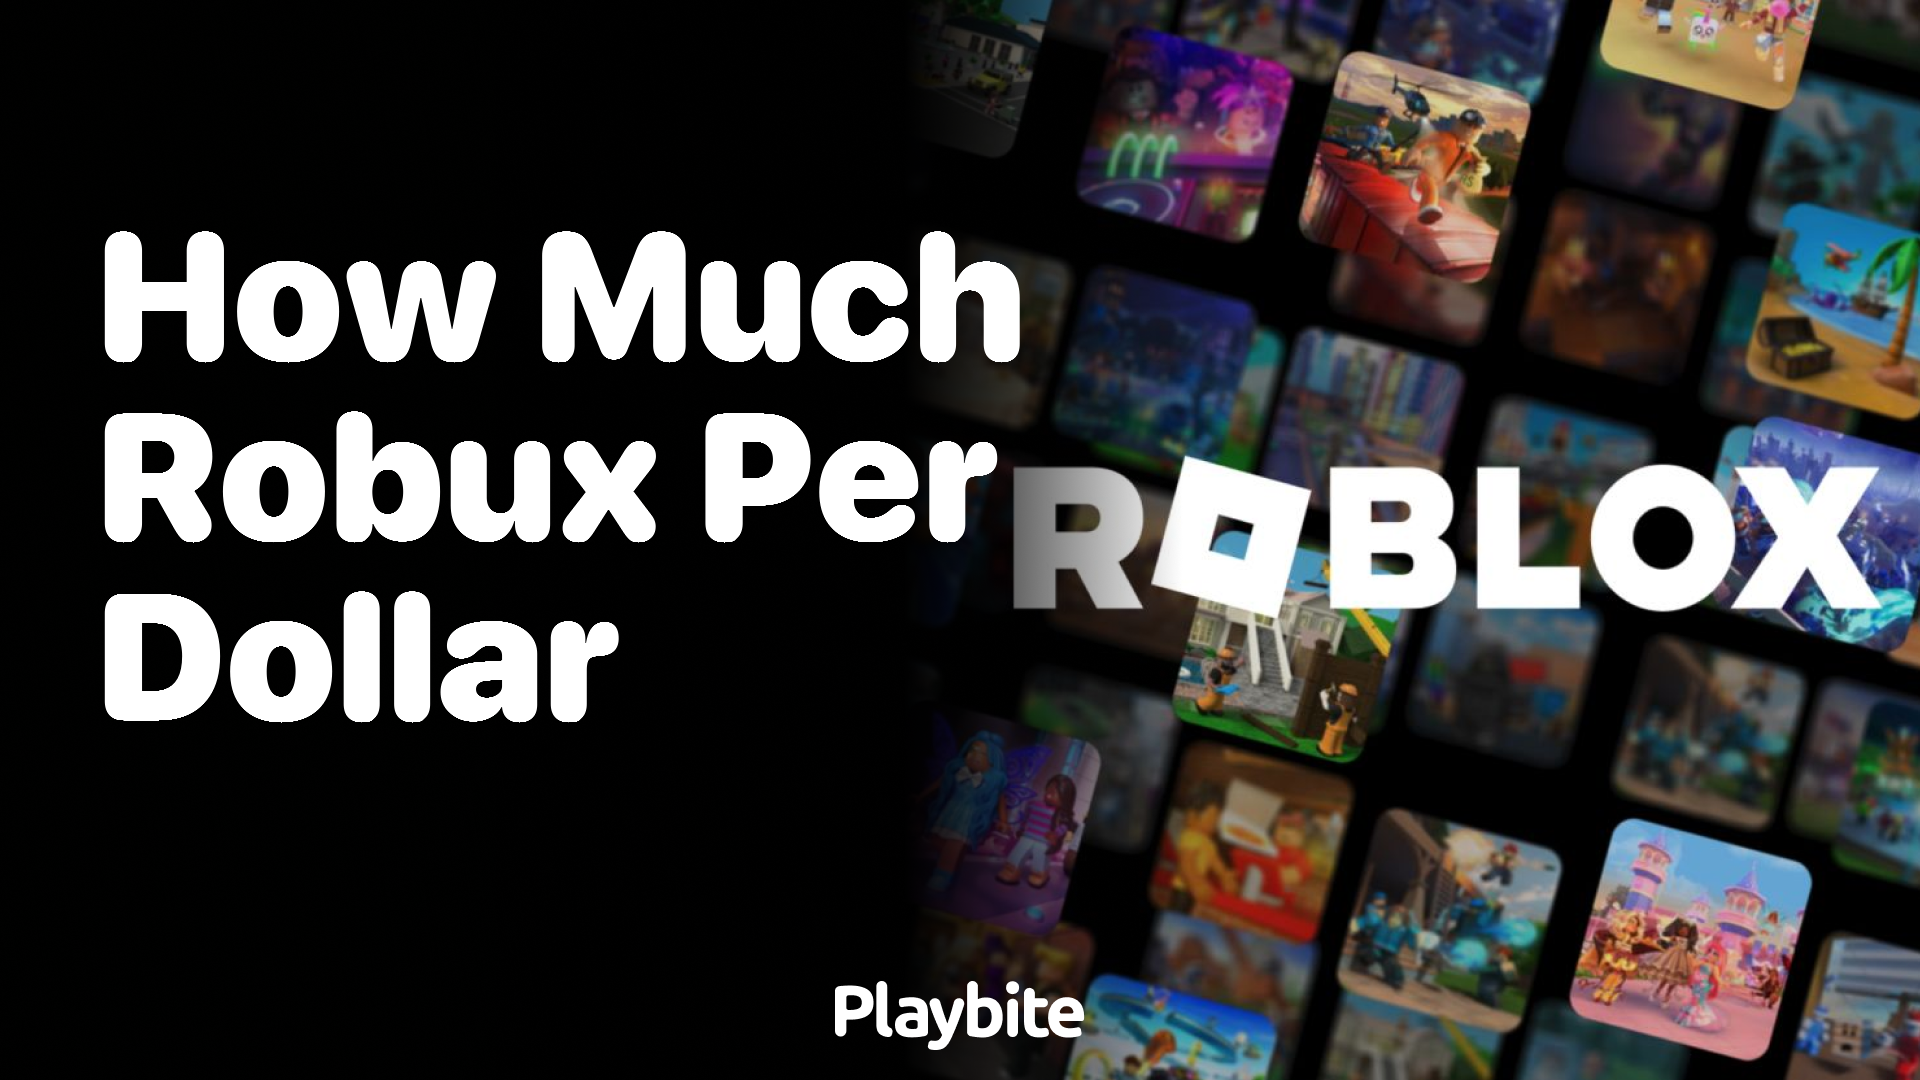 How Much Robux Do You Get Per Dollar?